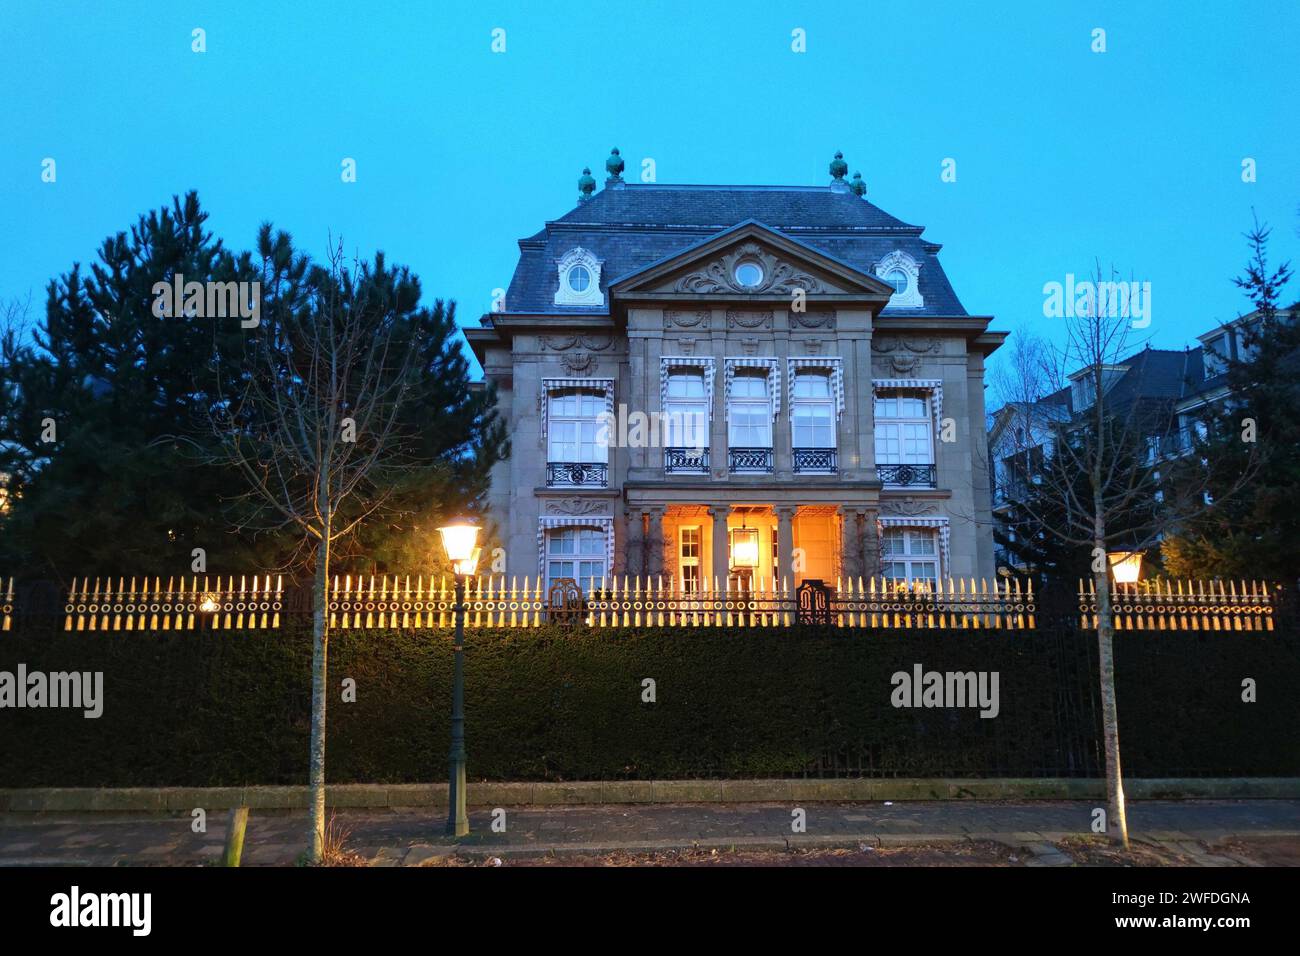 Villa Sandhaghe, an ancient robust villa in Dutch embassy district of The Hague, Netherlands Stock Photo